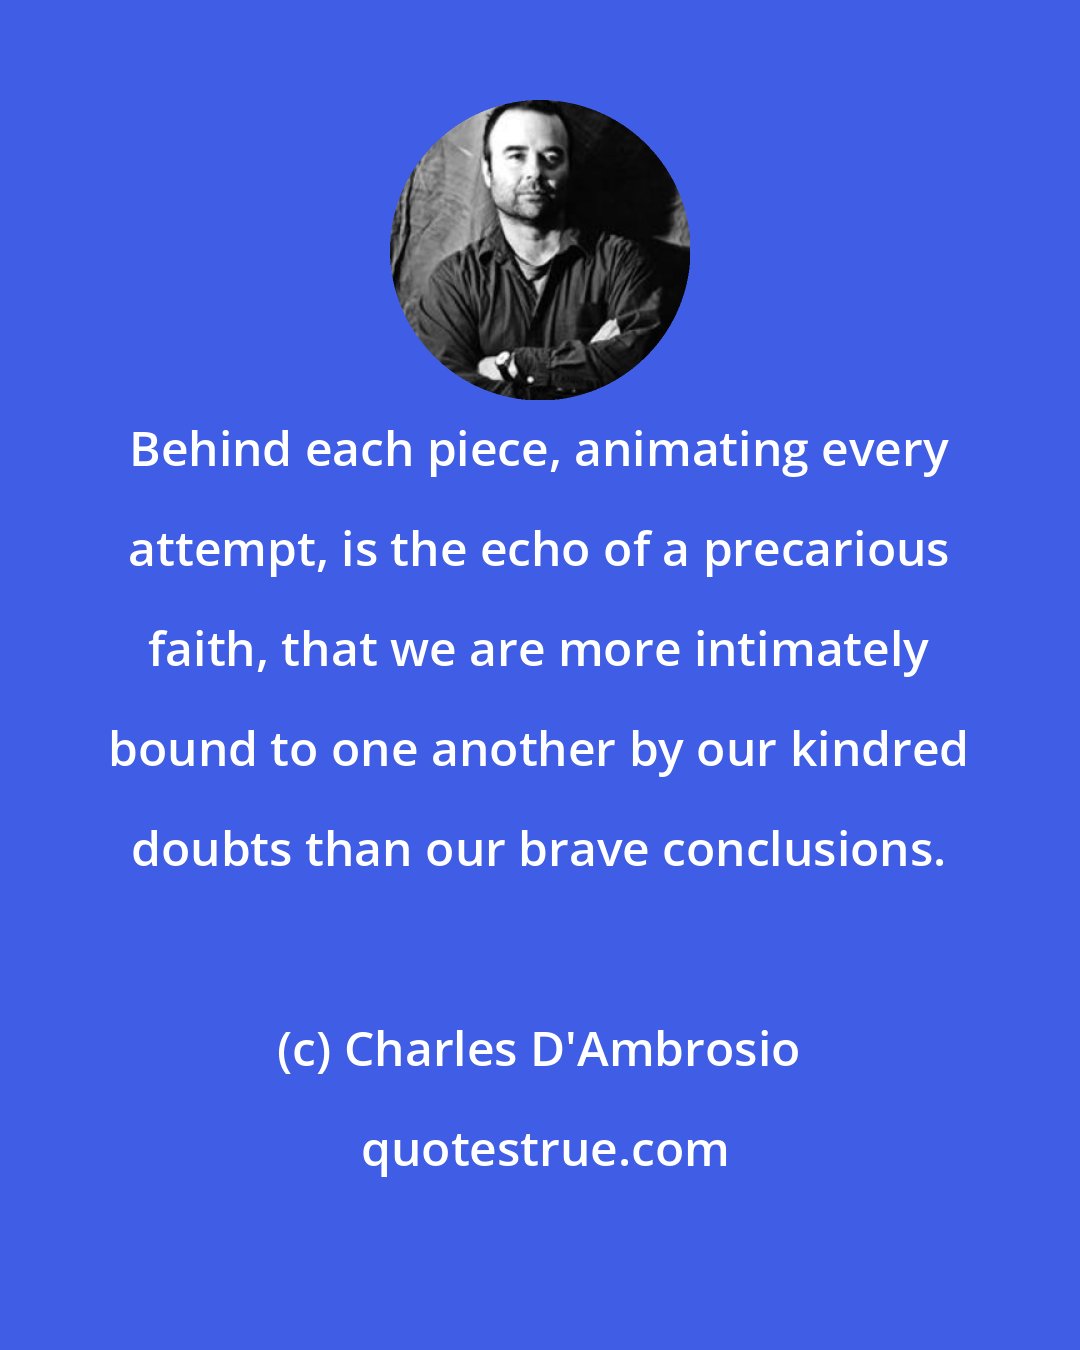 Charles D'Ambrosio: Behind each piece, animating every attempt, is the echo of a precarious faith, that we are more intimately bound to one another by our kindred doubts than our brave conclusions.